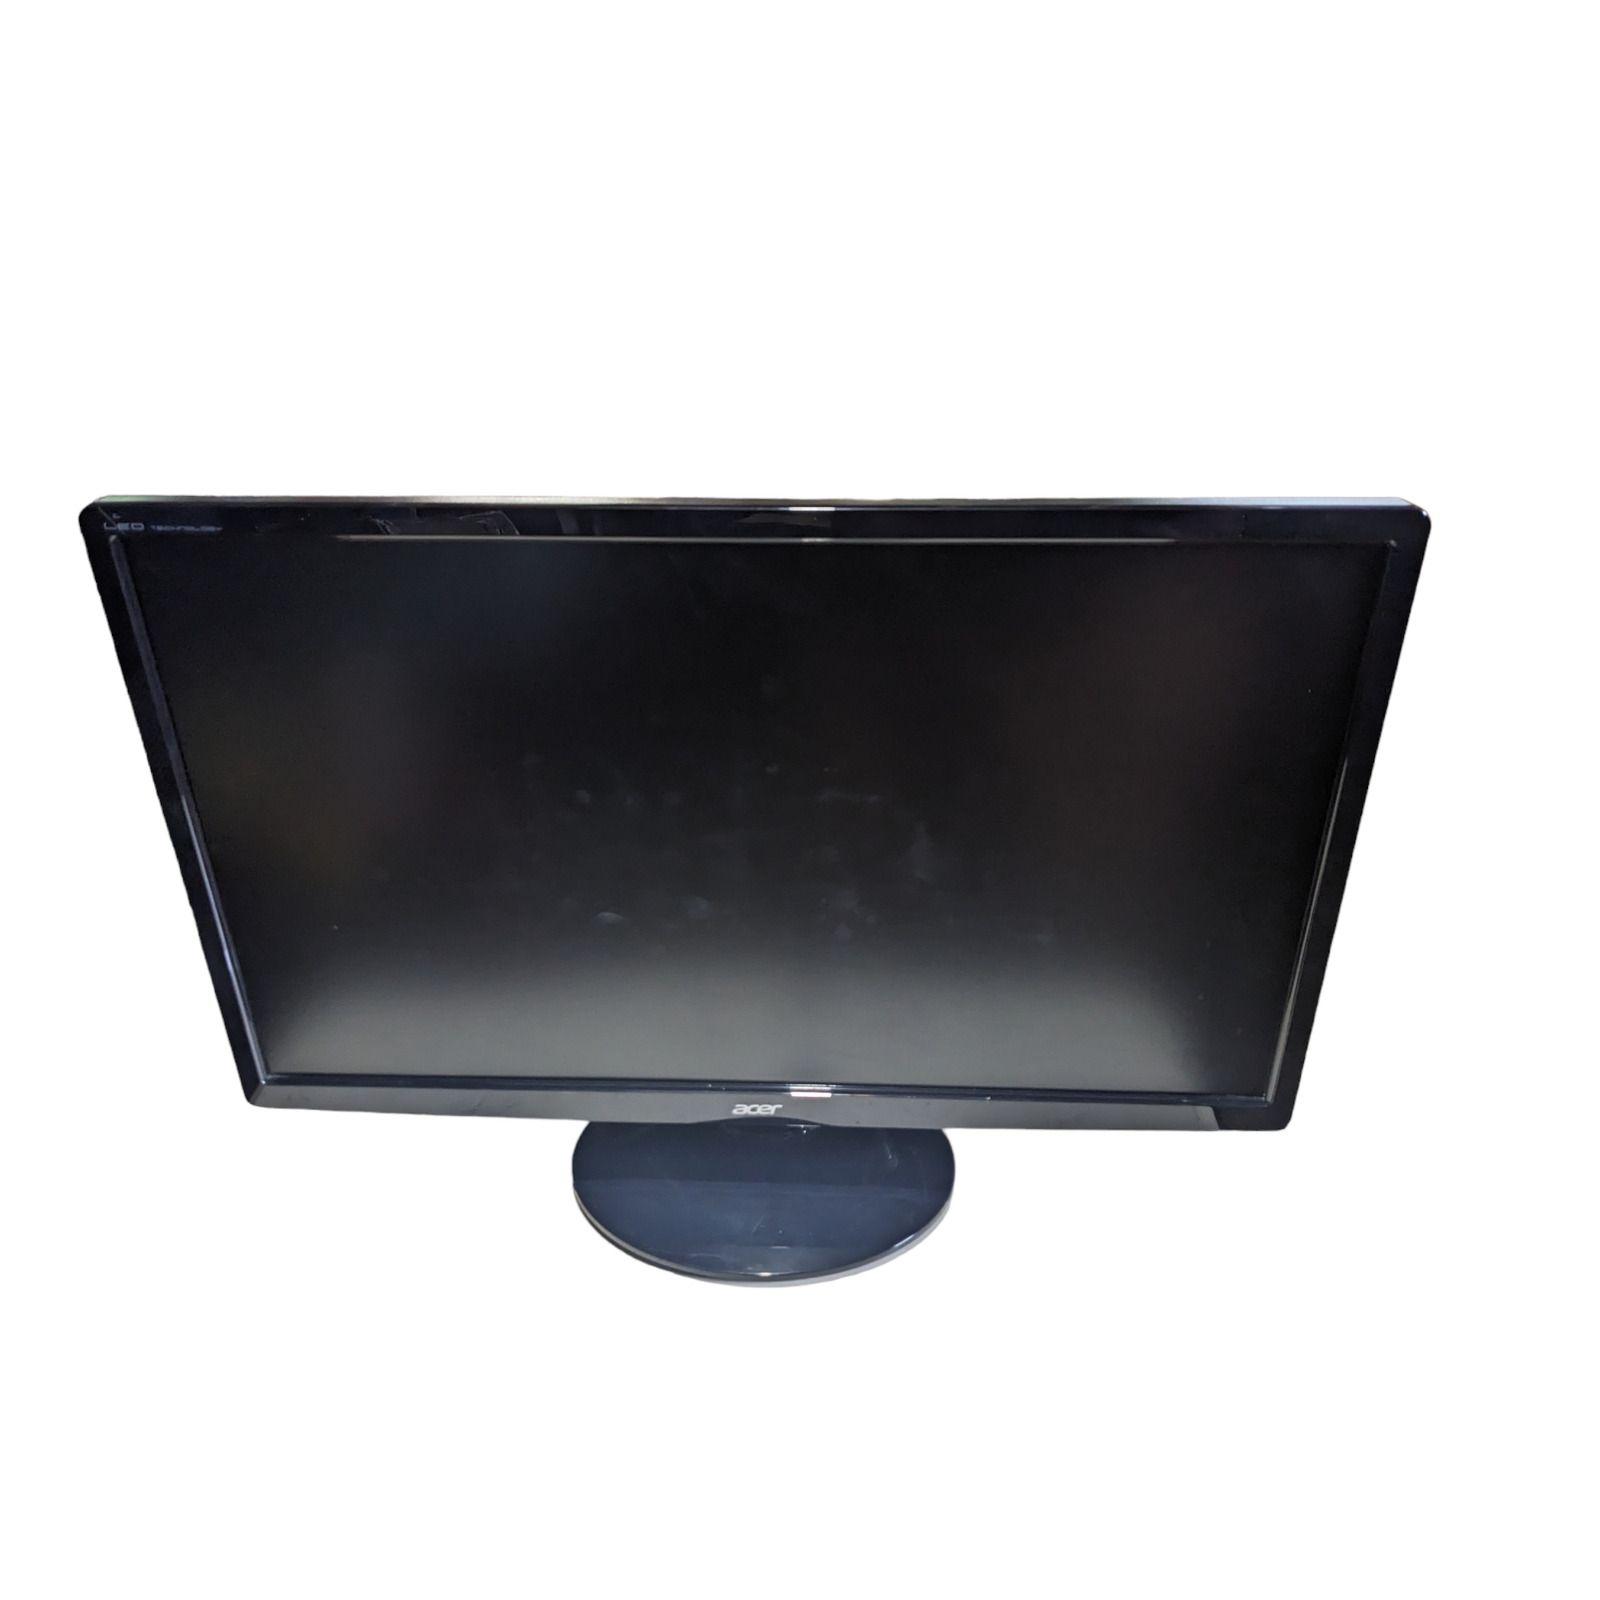 Acer S231HL Monitor - Used, Cleaned and Tested